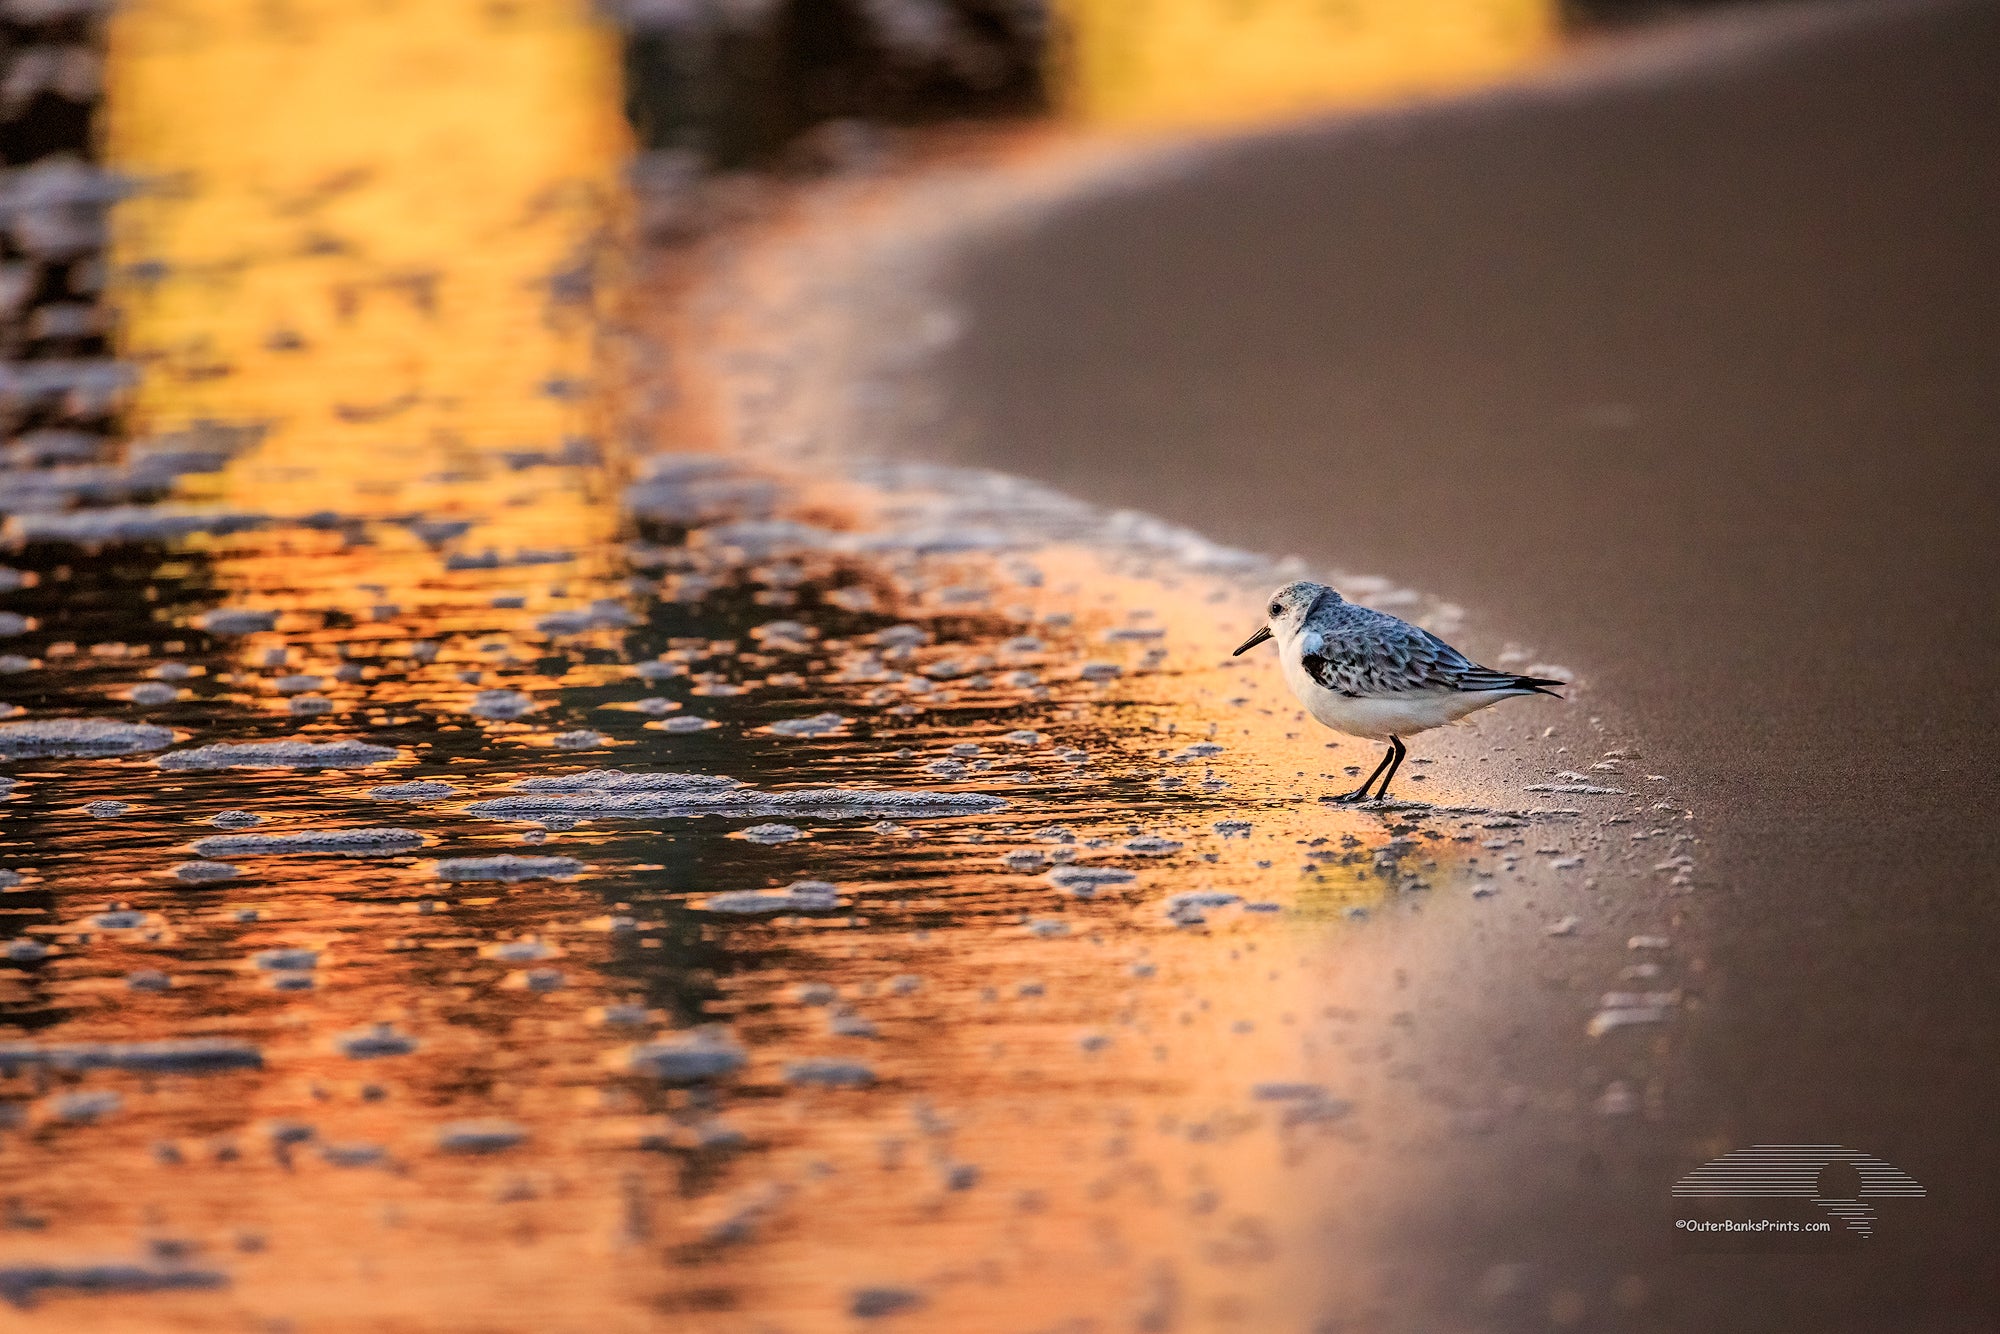 Sandpiper with the colorful sunrise reflected in the surf at Avalon Fishing Pier in Kill Devil Hills on the Outer Banks of NC.